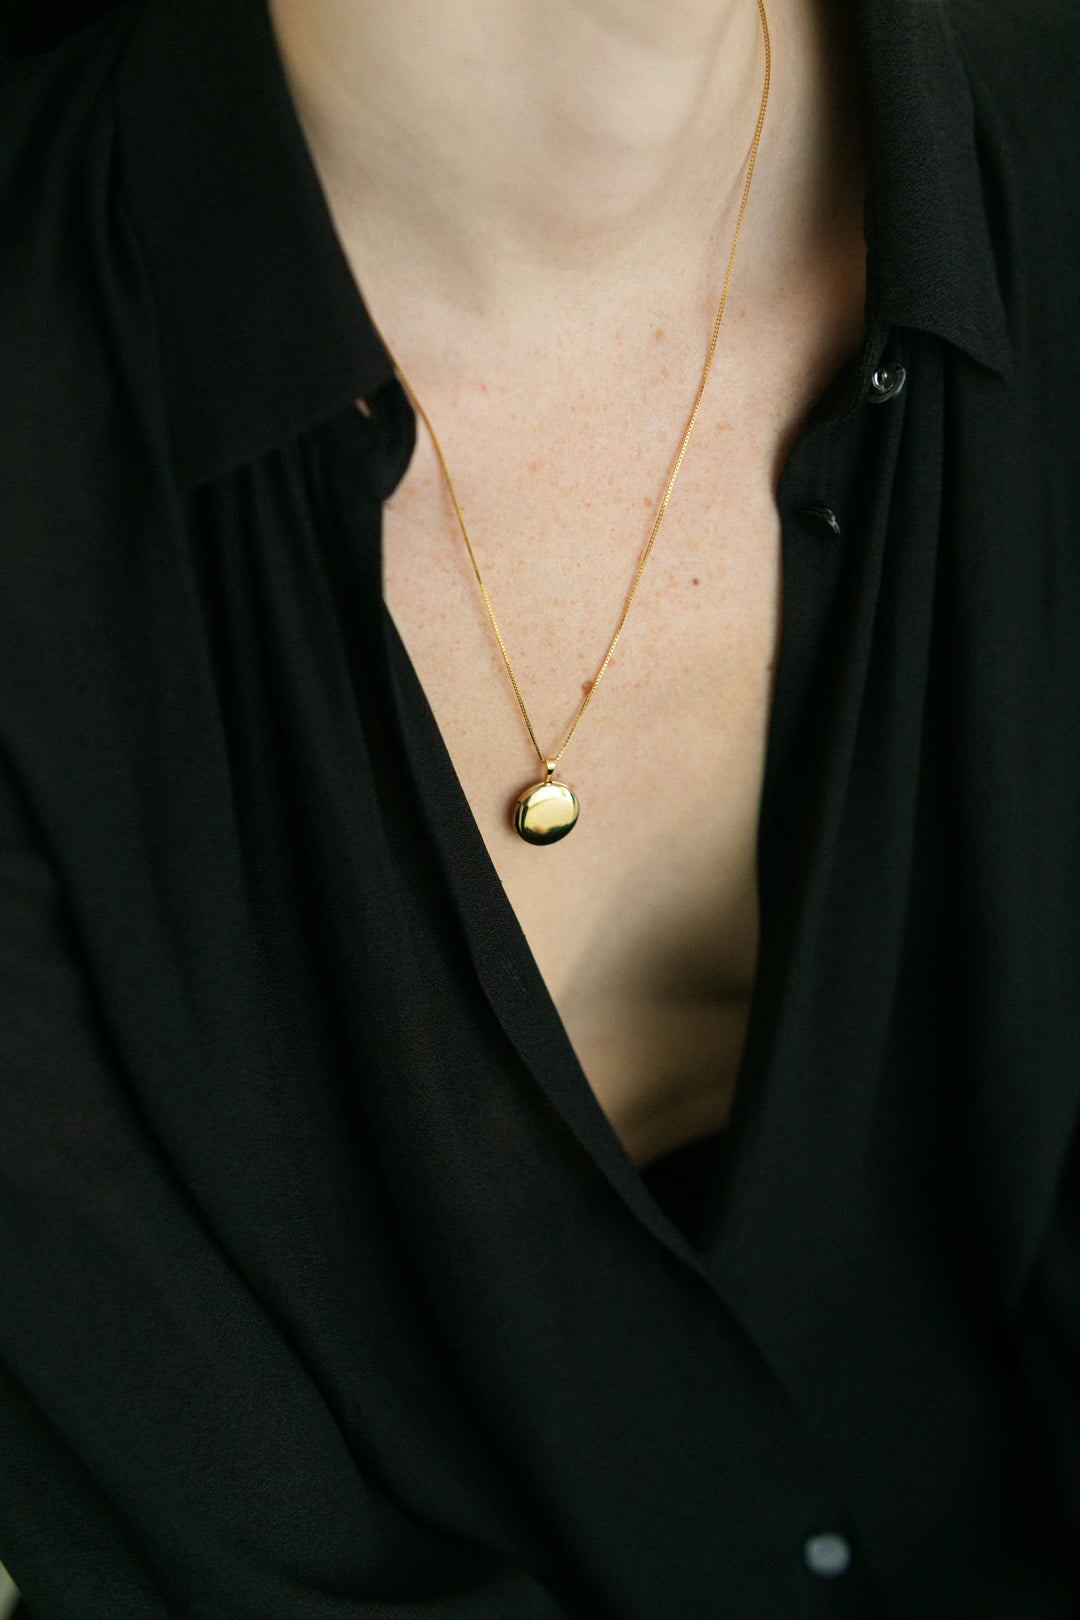 Classic Round Locket Necklace - Gold